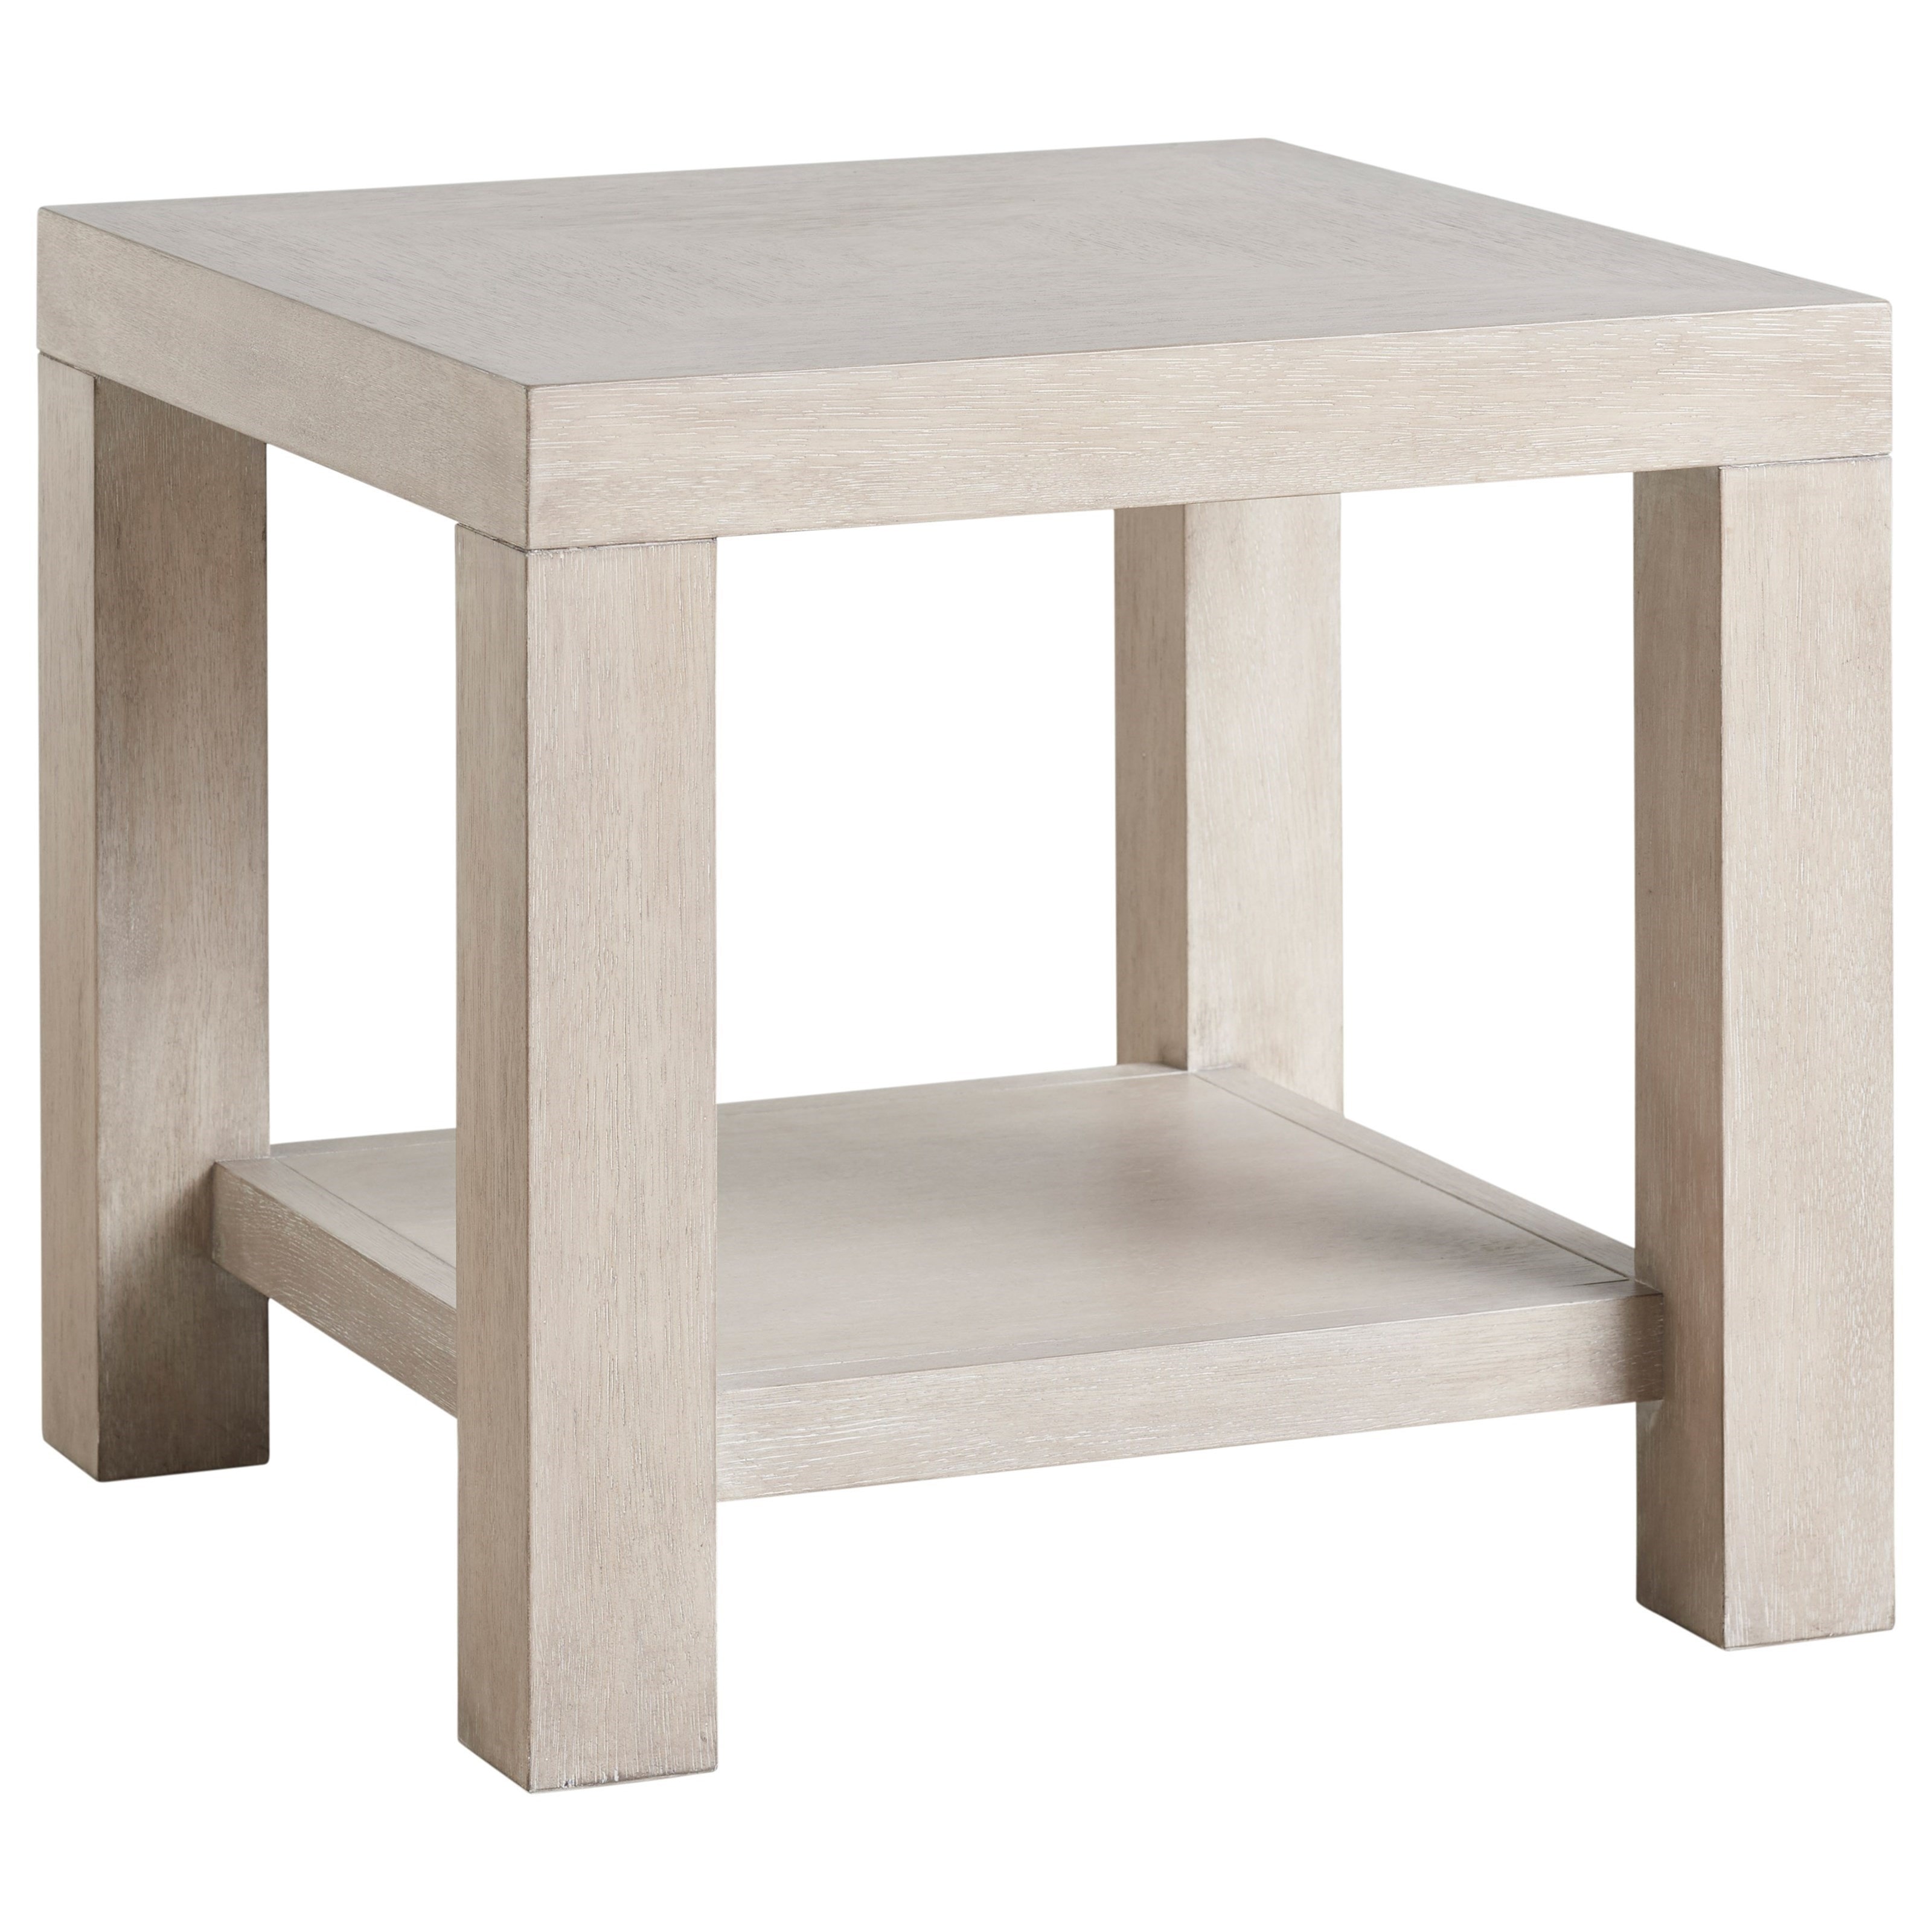 Barclay Butera Malibu Surfrider End Table with Shelf Malouf Furniture Co.  Occ End Tables